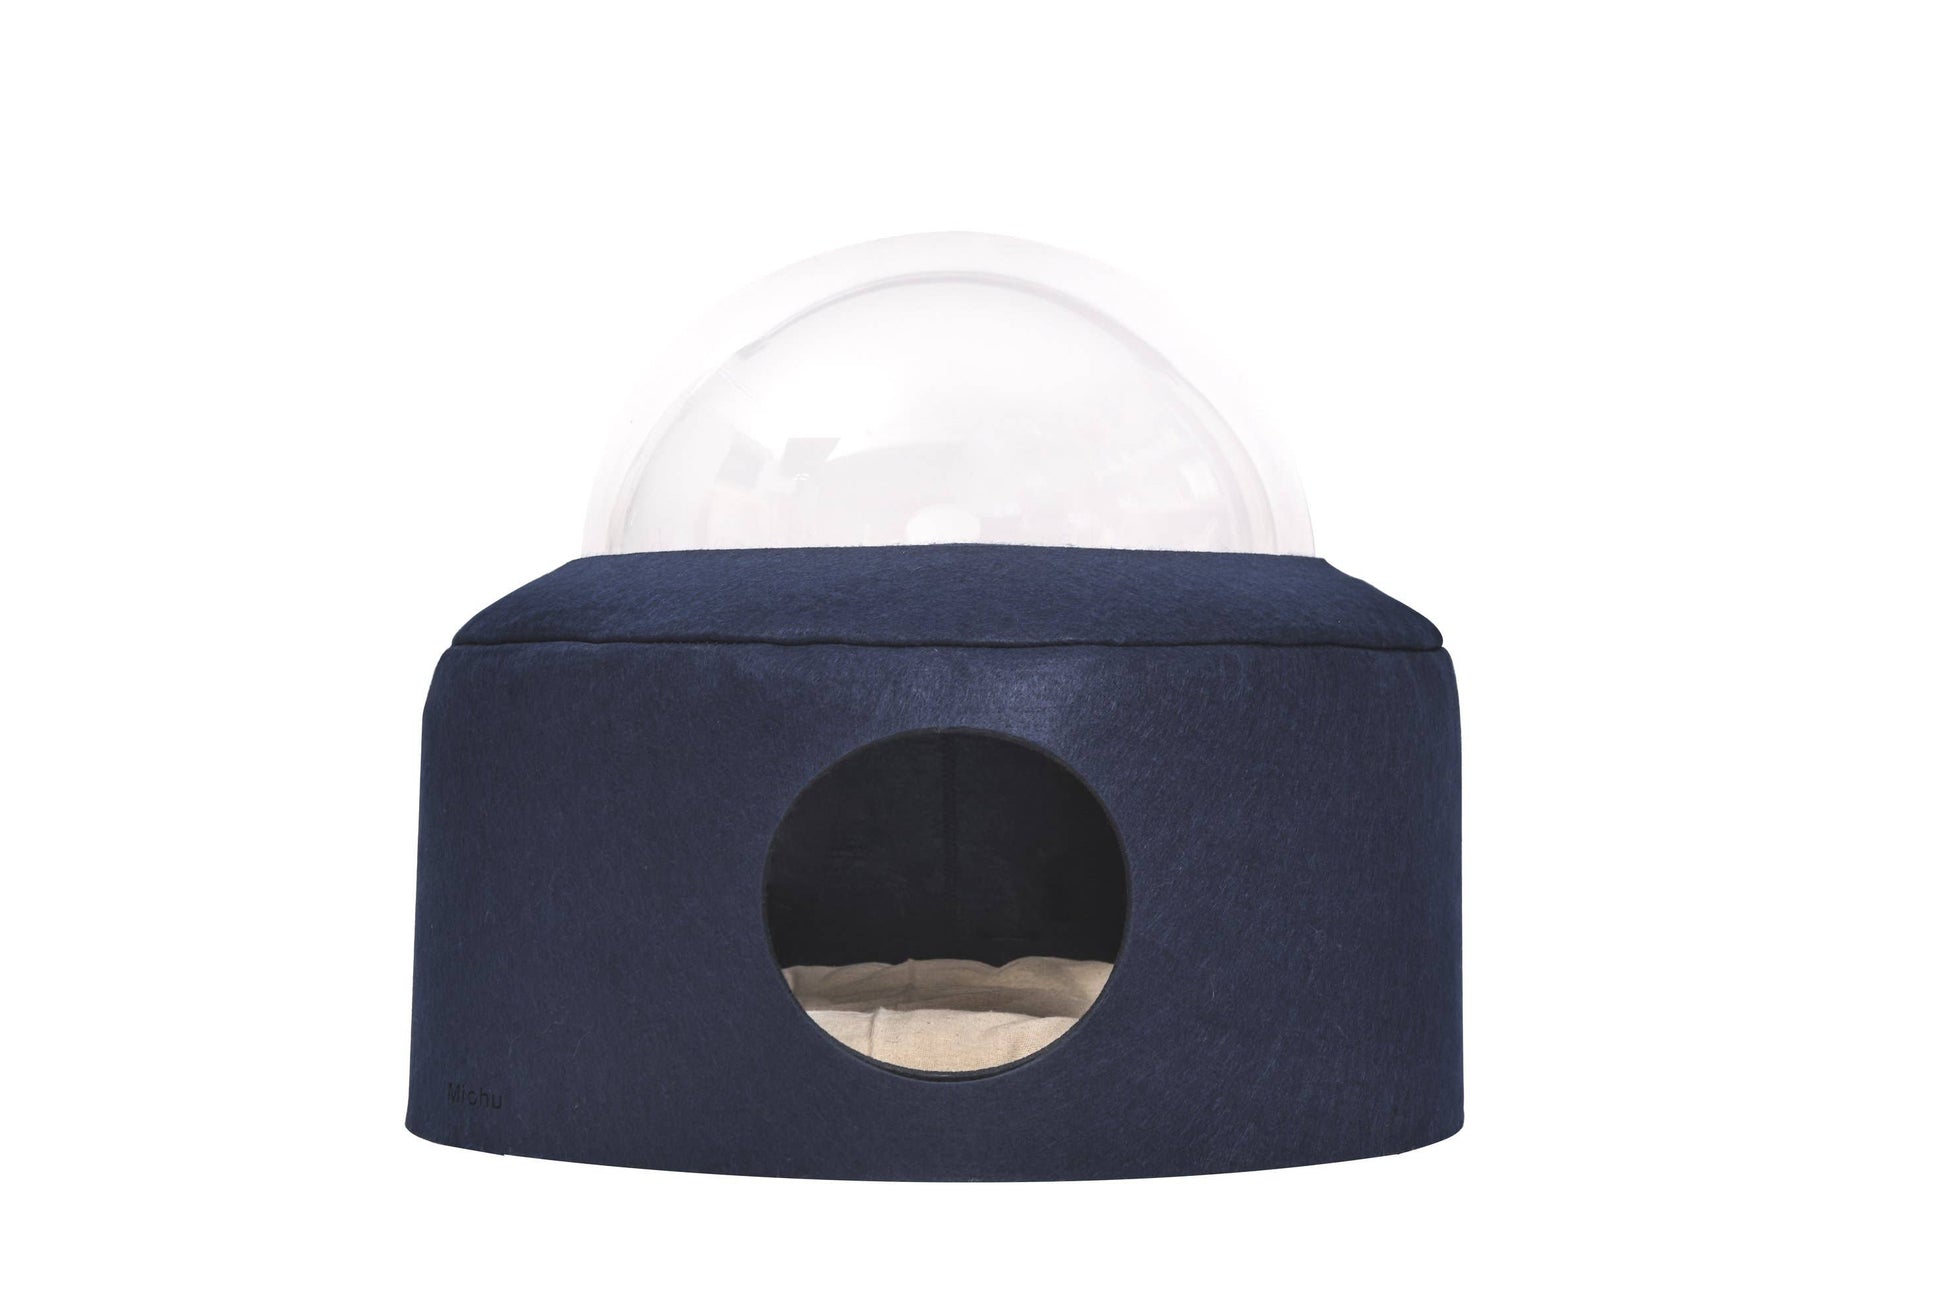 space capsule cat bed with dome top lookout